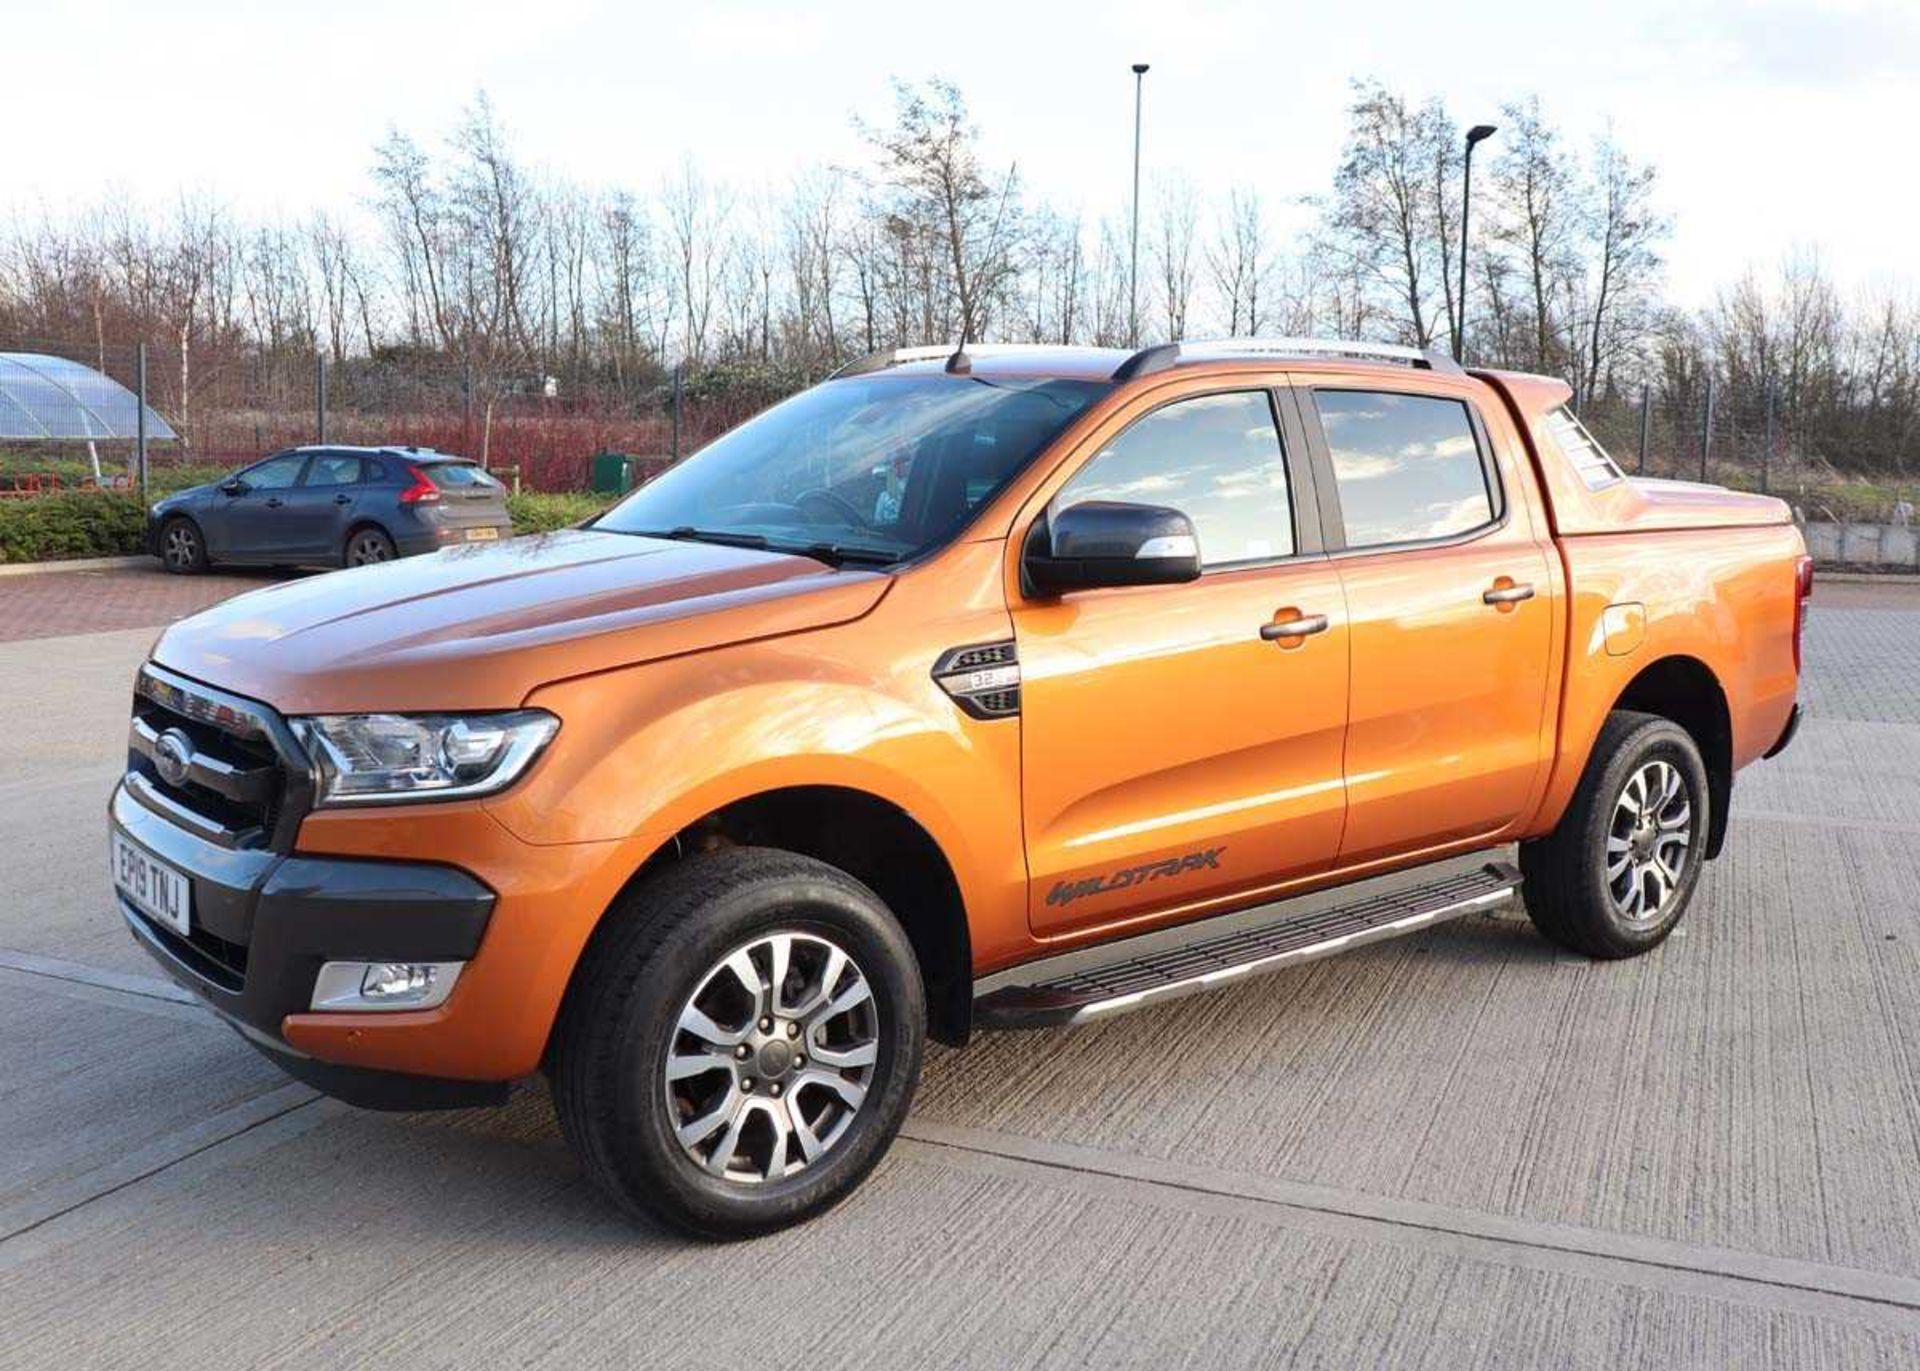 EP19 TNJ (2019) Ford Ranger Wildtrak 4x4 DCB T 3198cc diesel pick up with double cab and 6 speed - Image 3 of 16